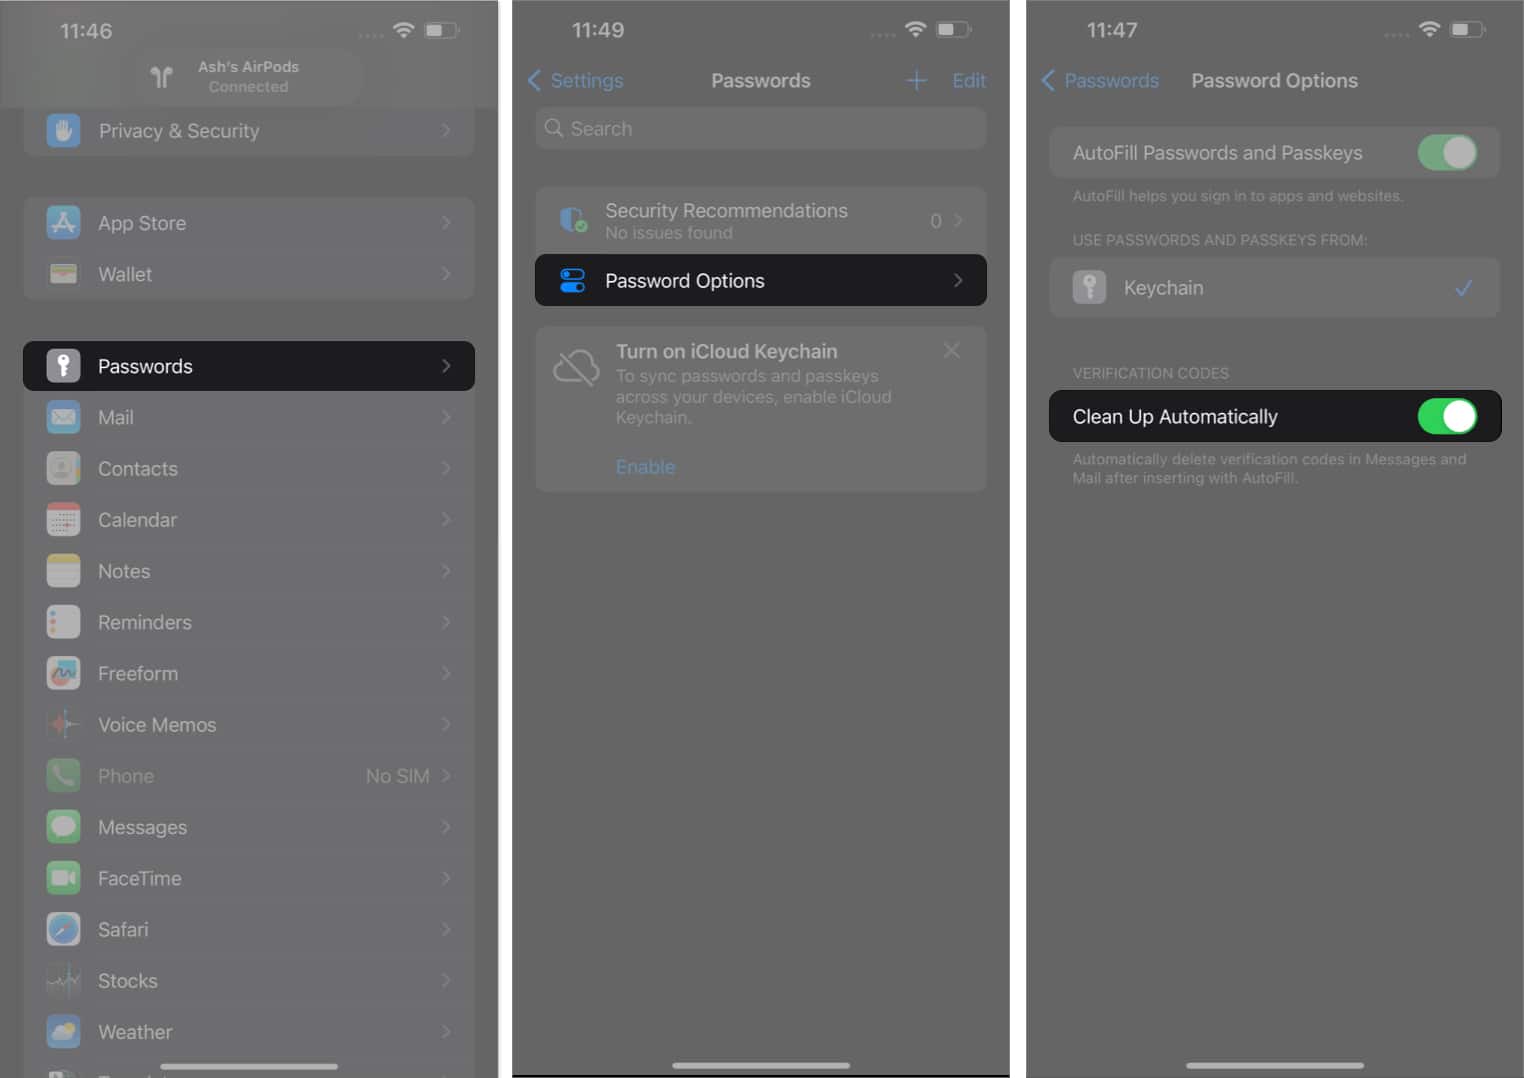 Tap Passwords, tap Password Options, enable Clean Up Automatically in settings